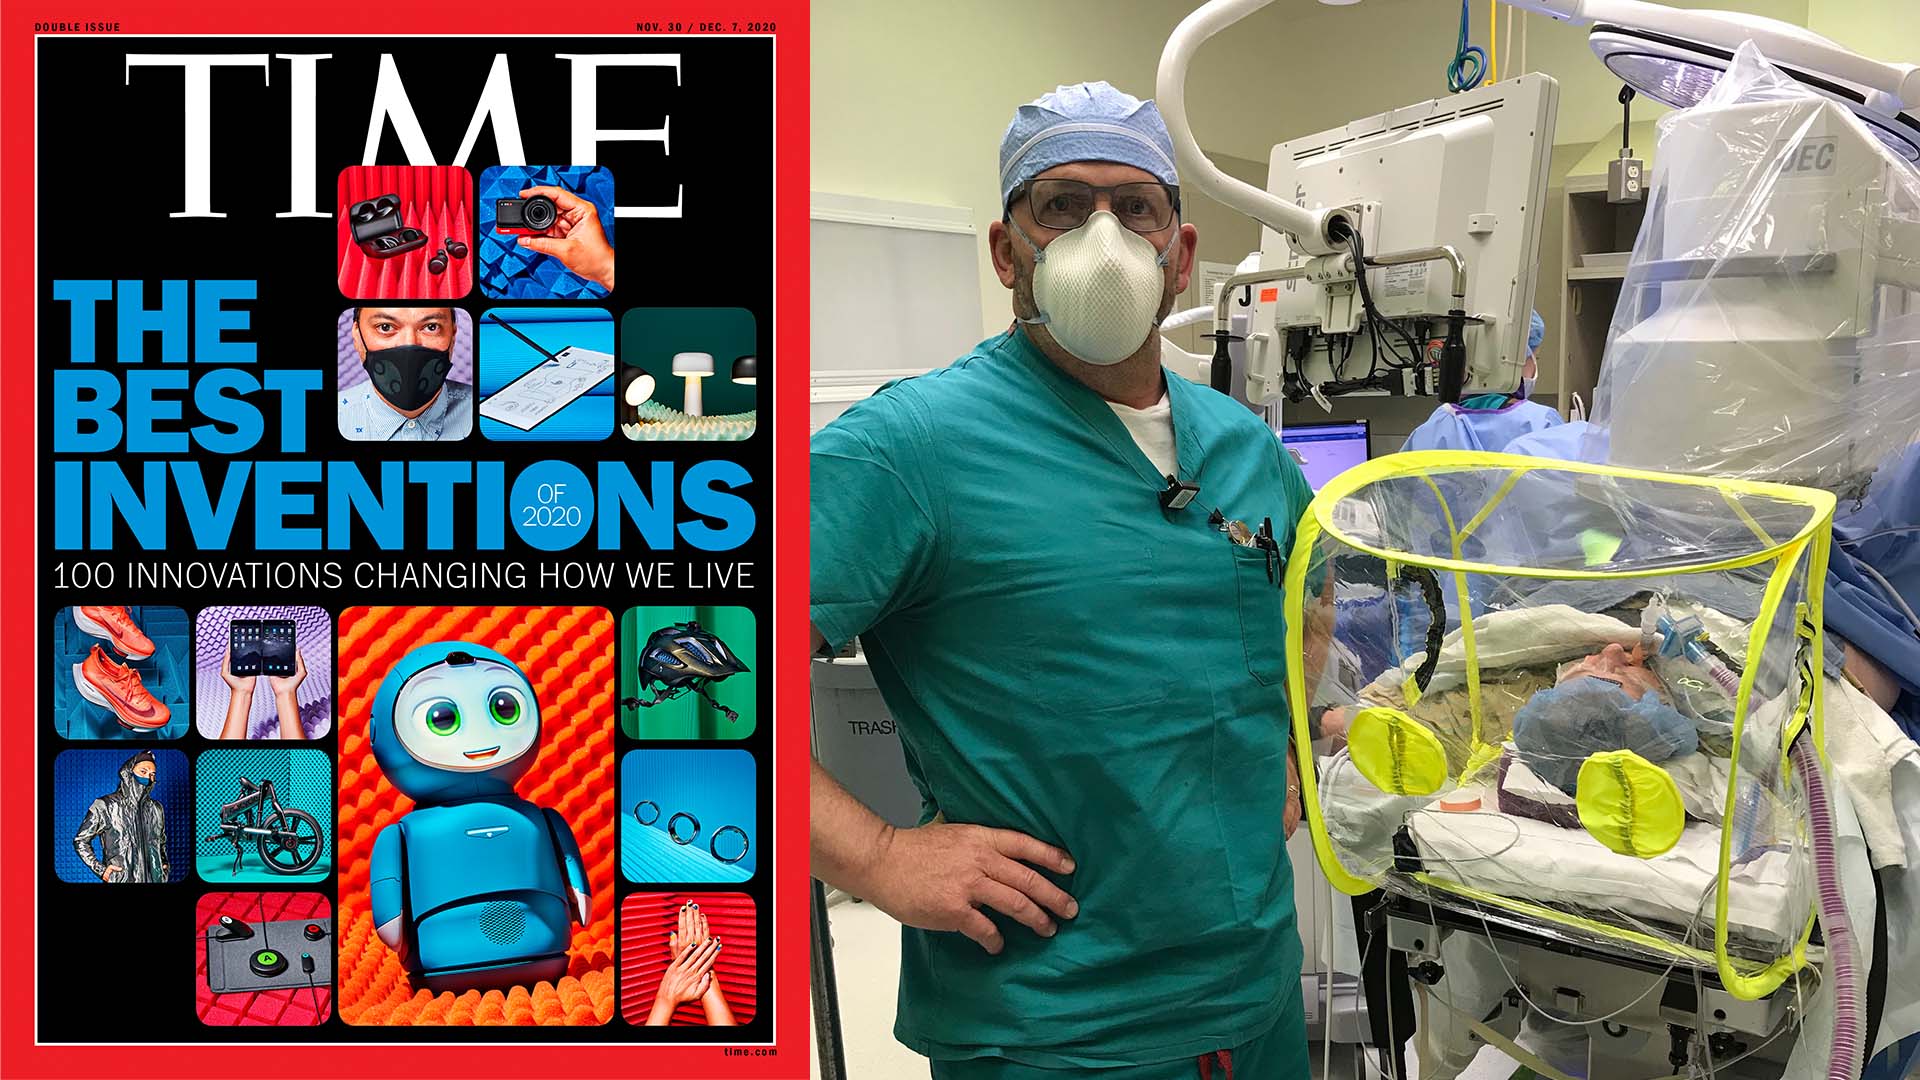 IntubationPod named one of TIME's 2020 Best Inventions